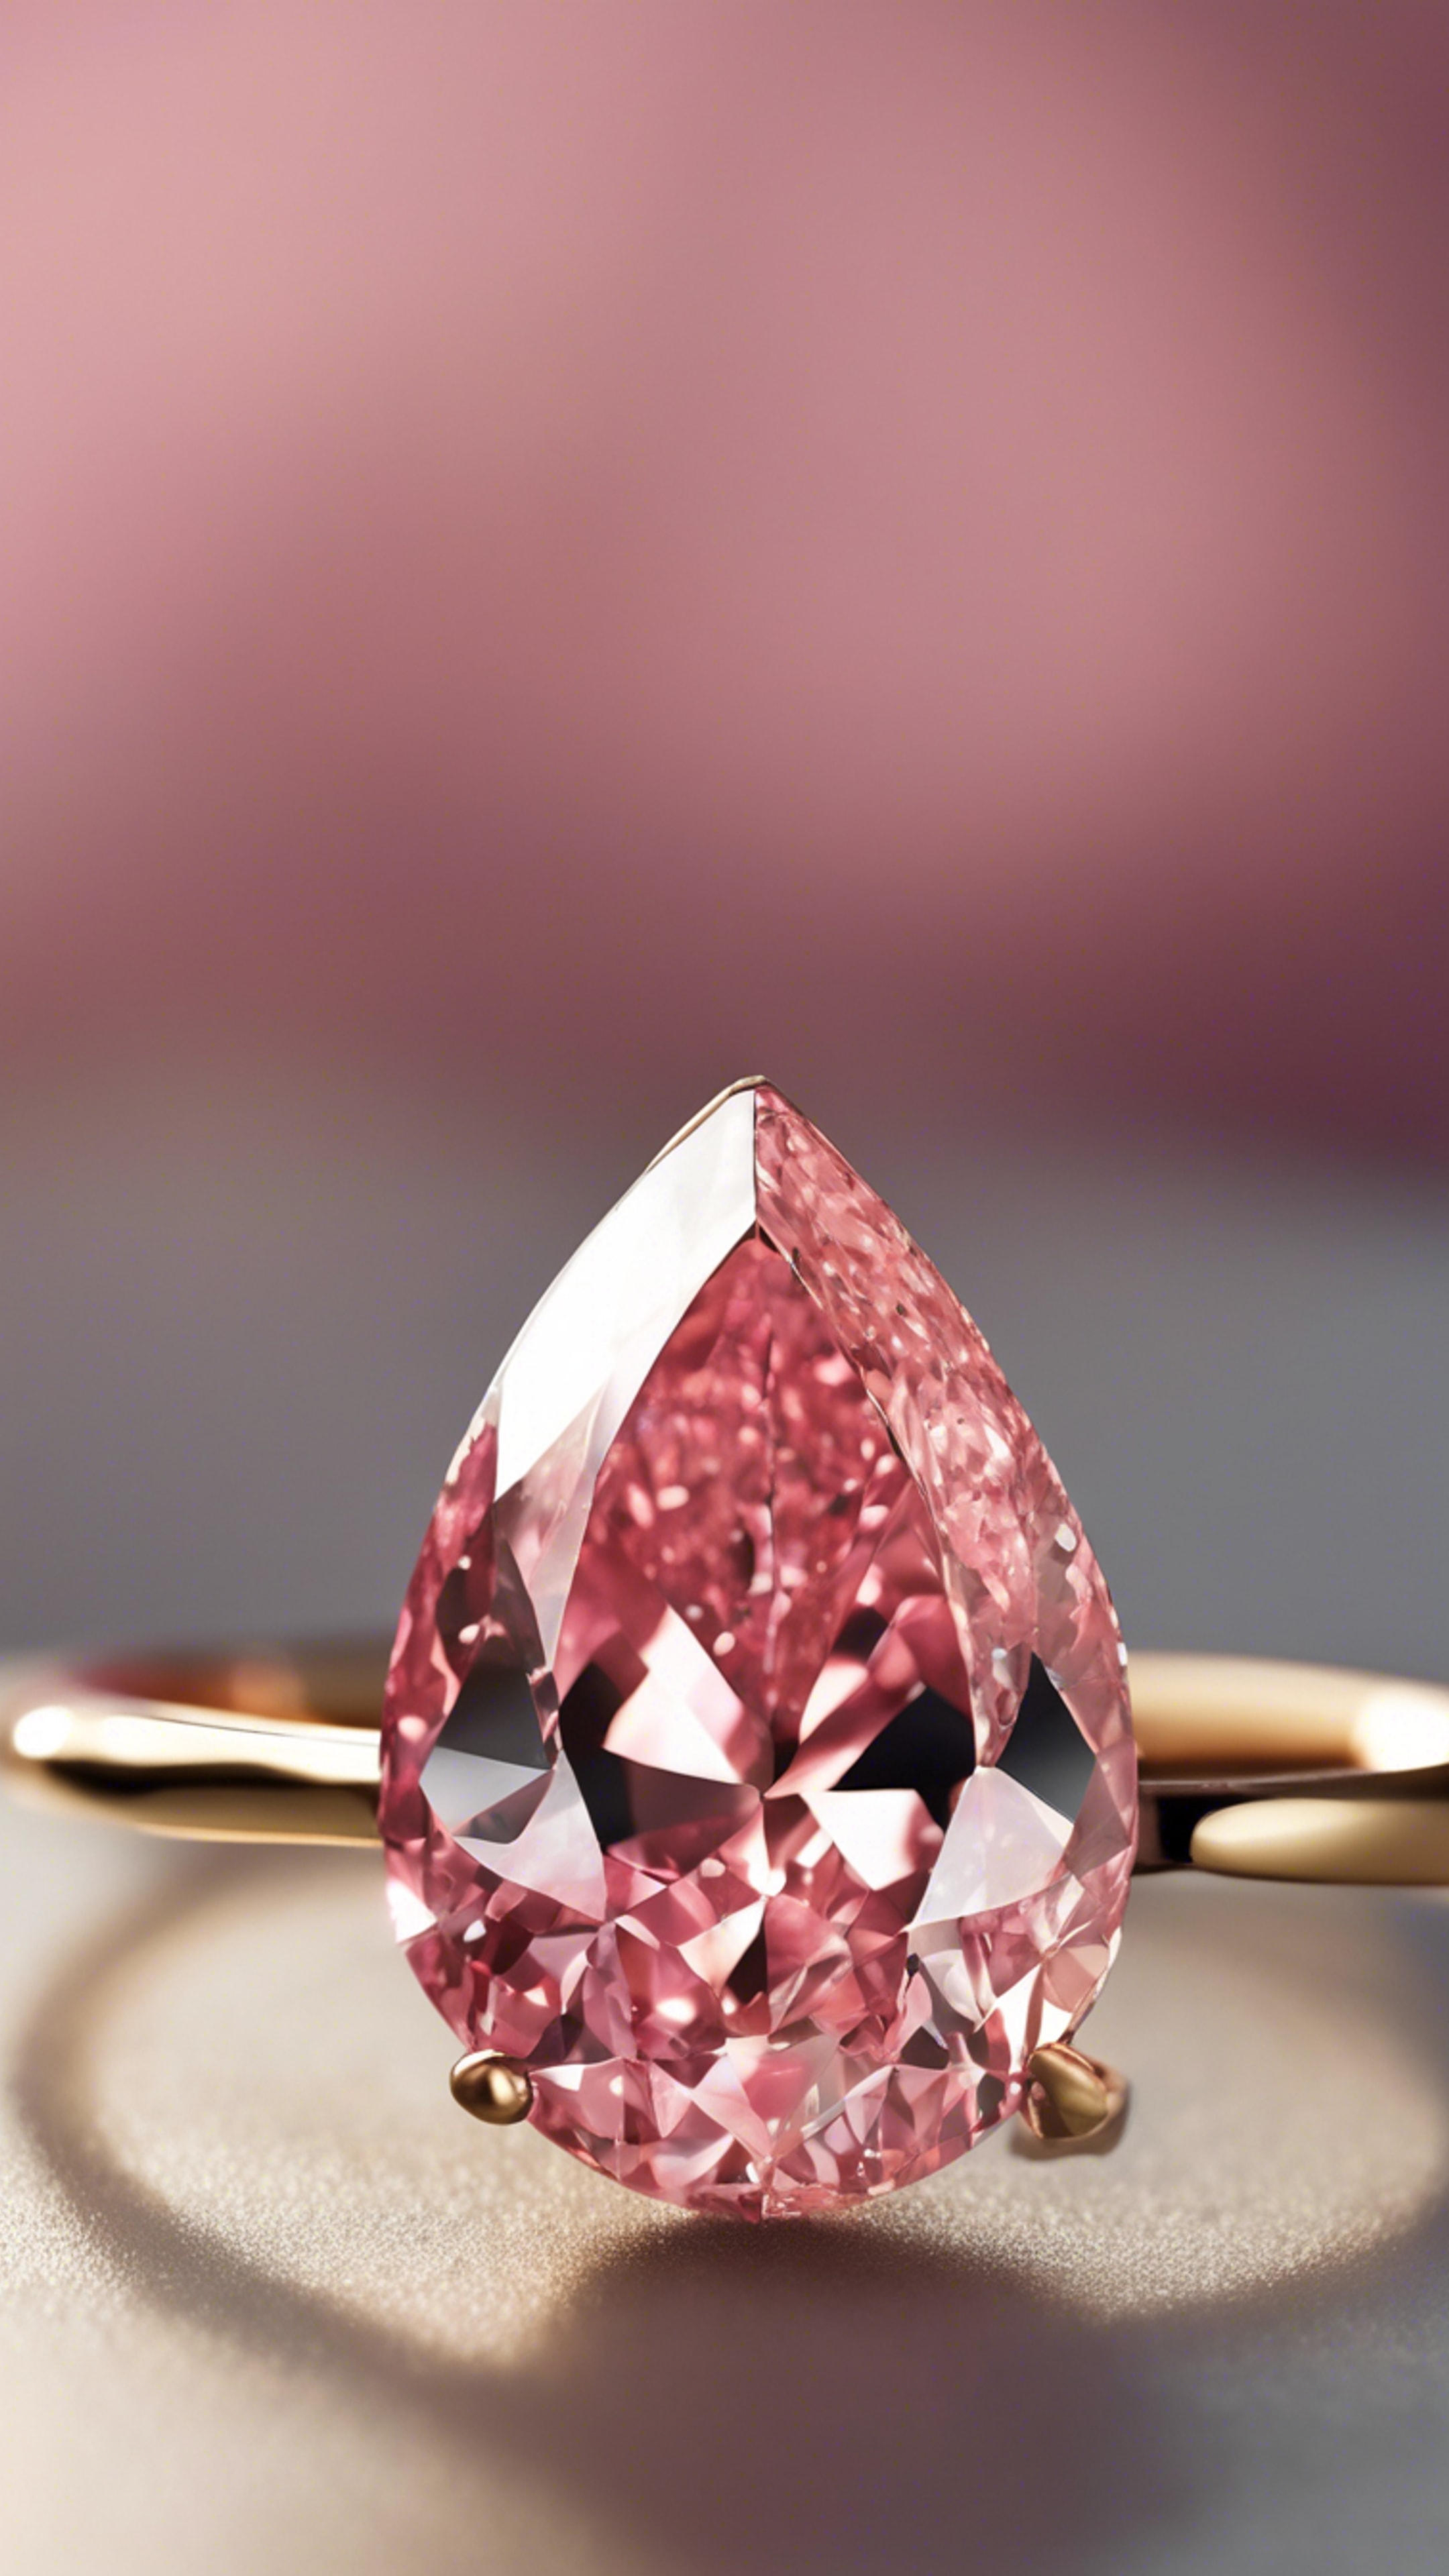 A close-up of a pink pear-shaped diamond on a simple gold band. Hintergrund[930f75676b4b4a58983f]